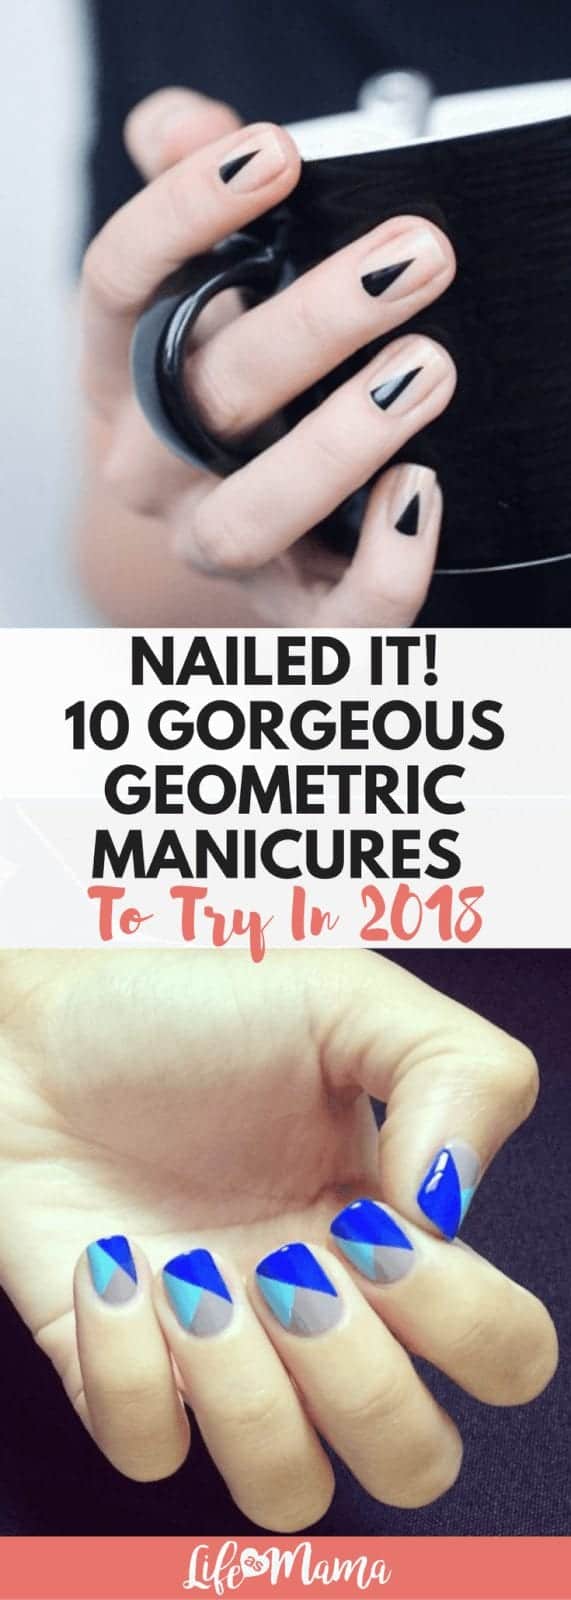 Nailed It! 10 Gorgeous Geometric Manicures To Try In 2018 - Page 3 of 3